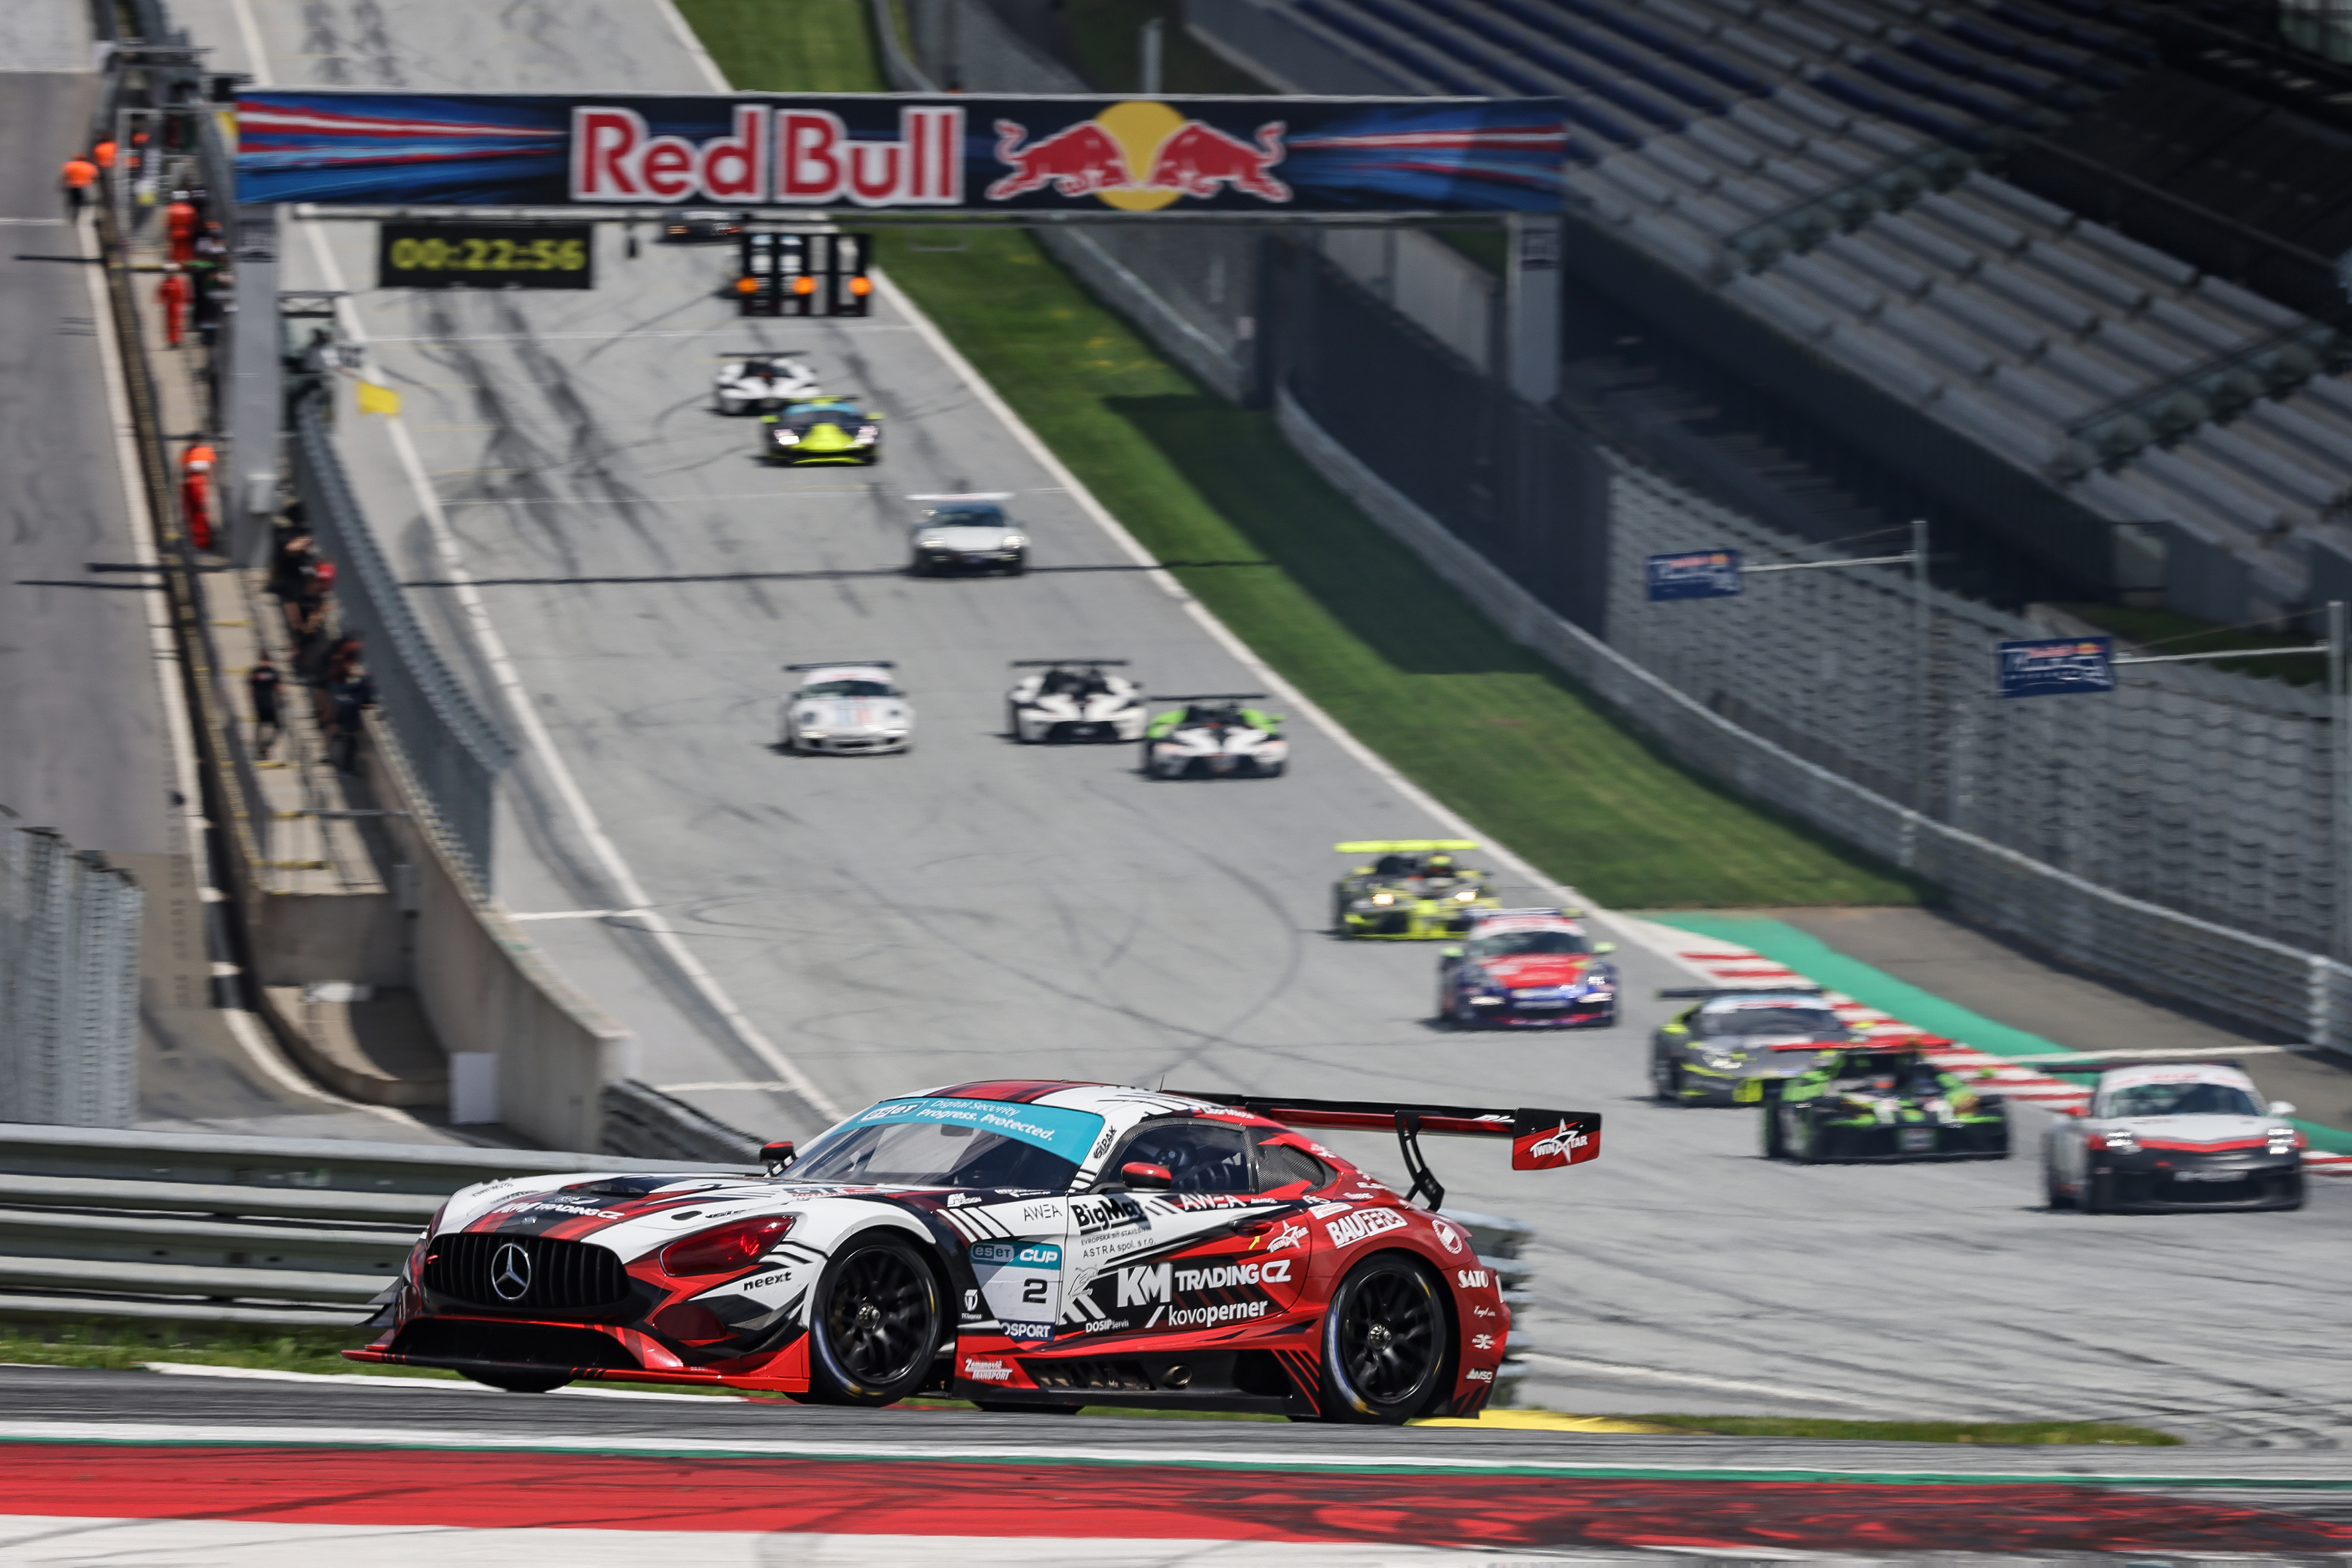 Introducing circuits of the 2023 season – Red Bull Ring